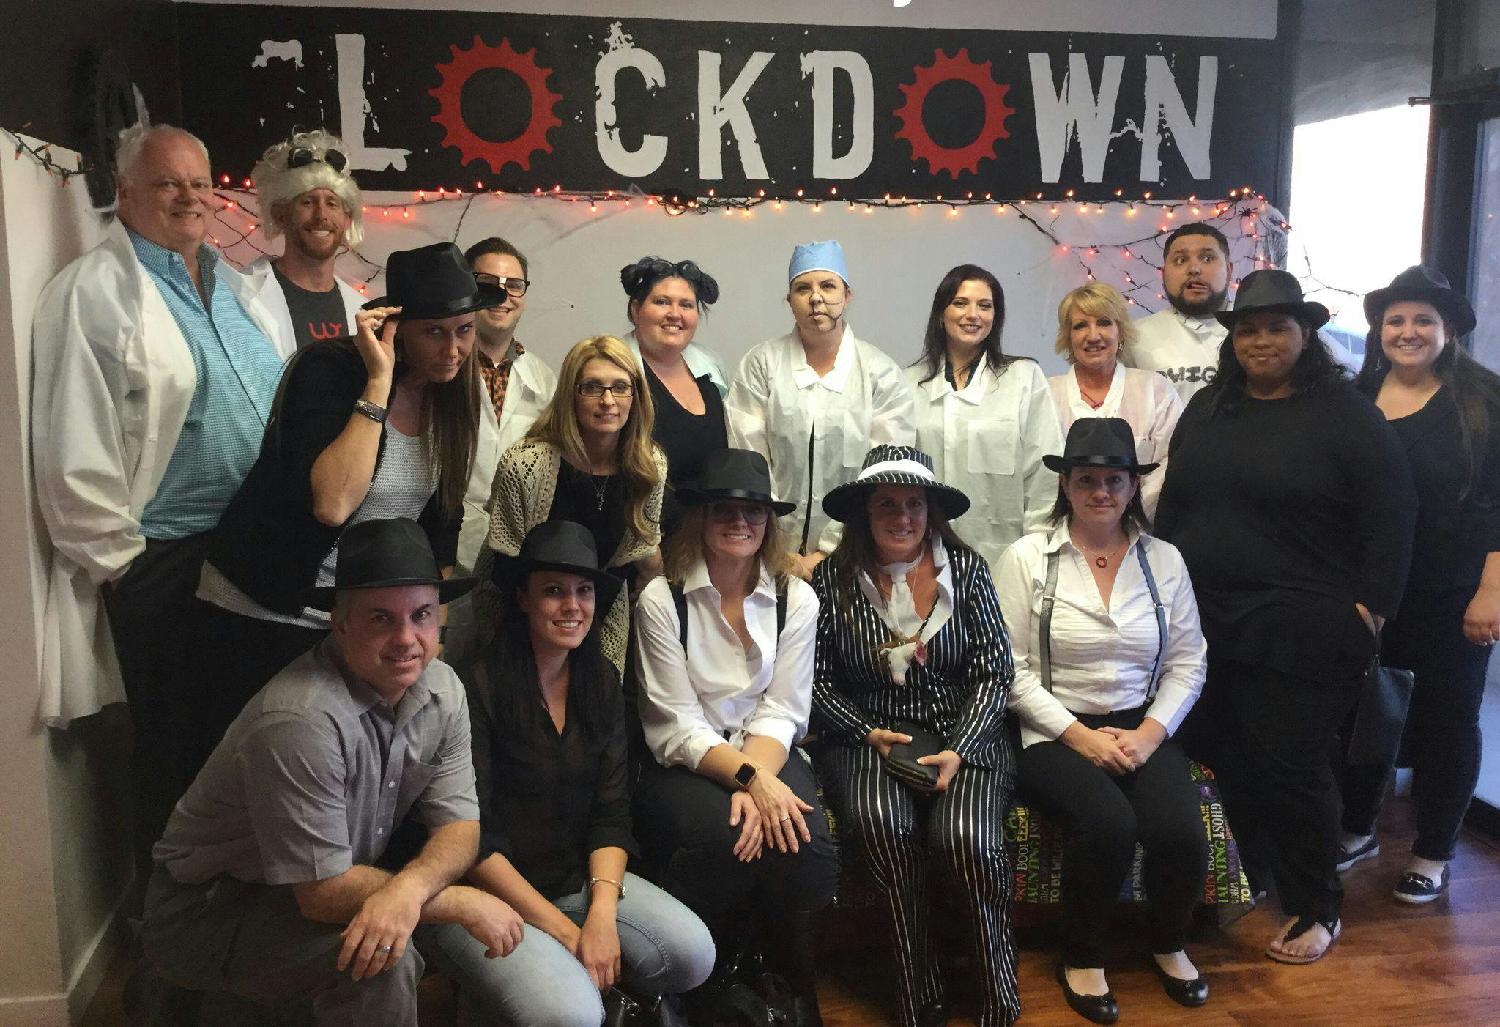 An Ignite Funding staff event at an escape room, where the two teams, the mad scientists and the mob bosses, competed to see who could solve their escape room first.